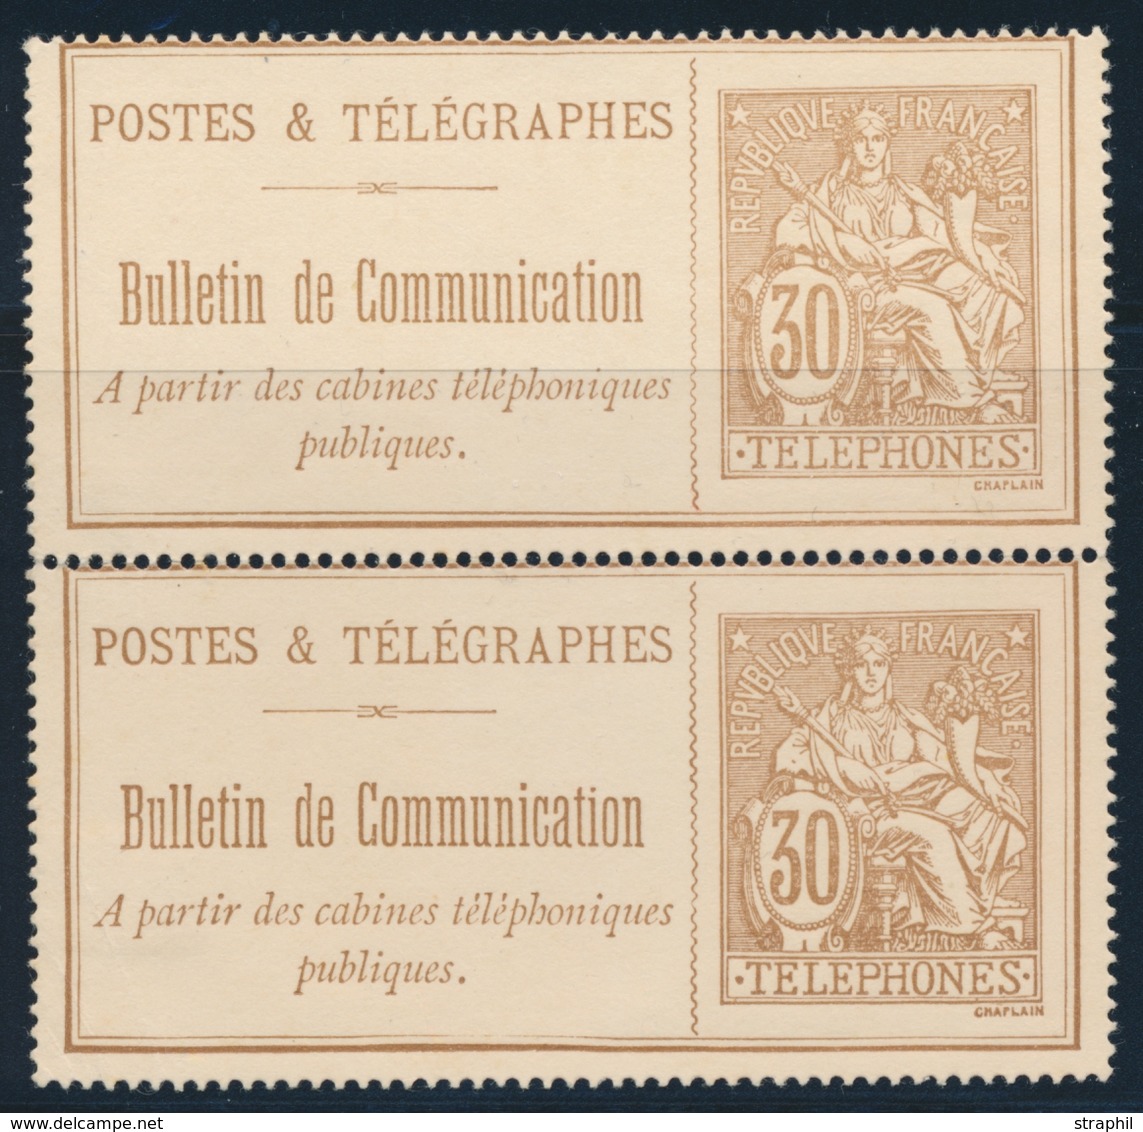 (*) TIMBRES - TELEPHONE - (*) - N°25 - Paire Vertic. - TB - Telegraph And Telephone